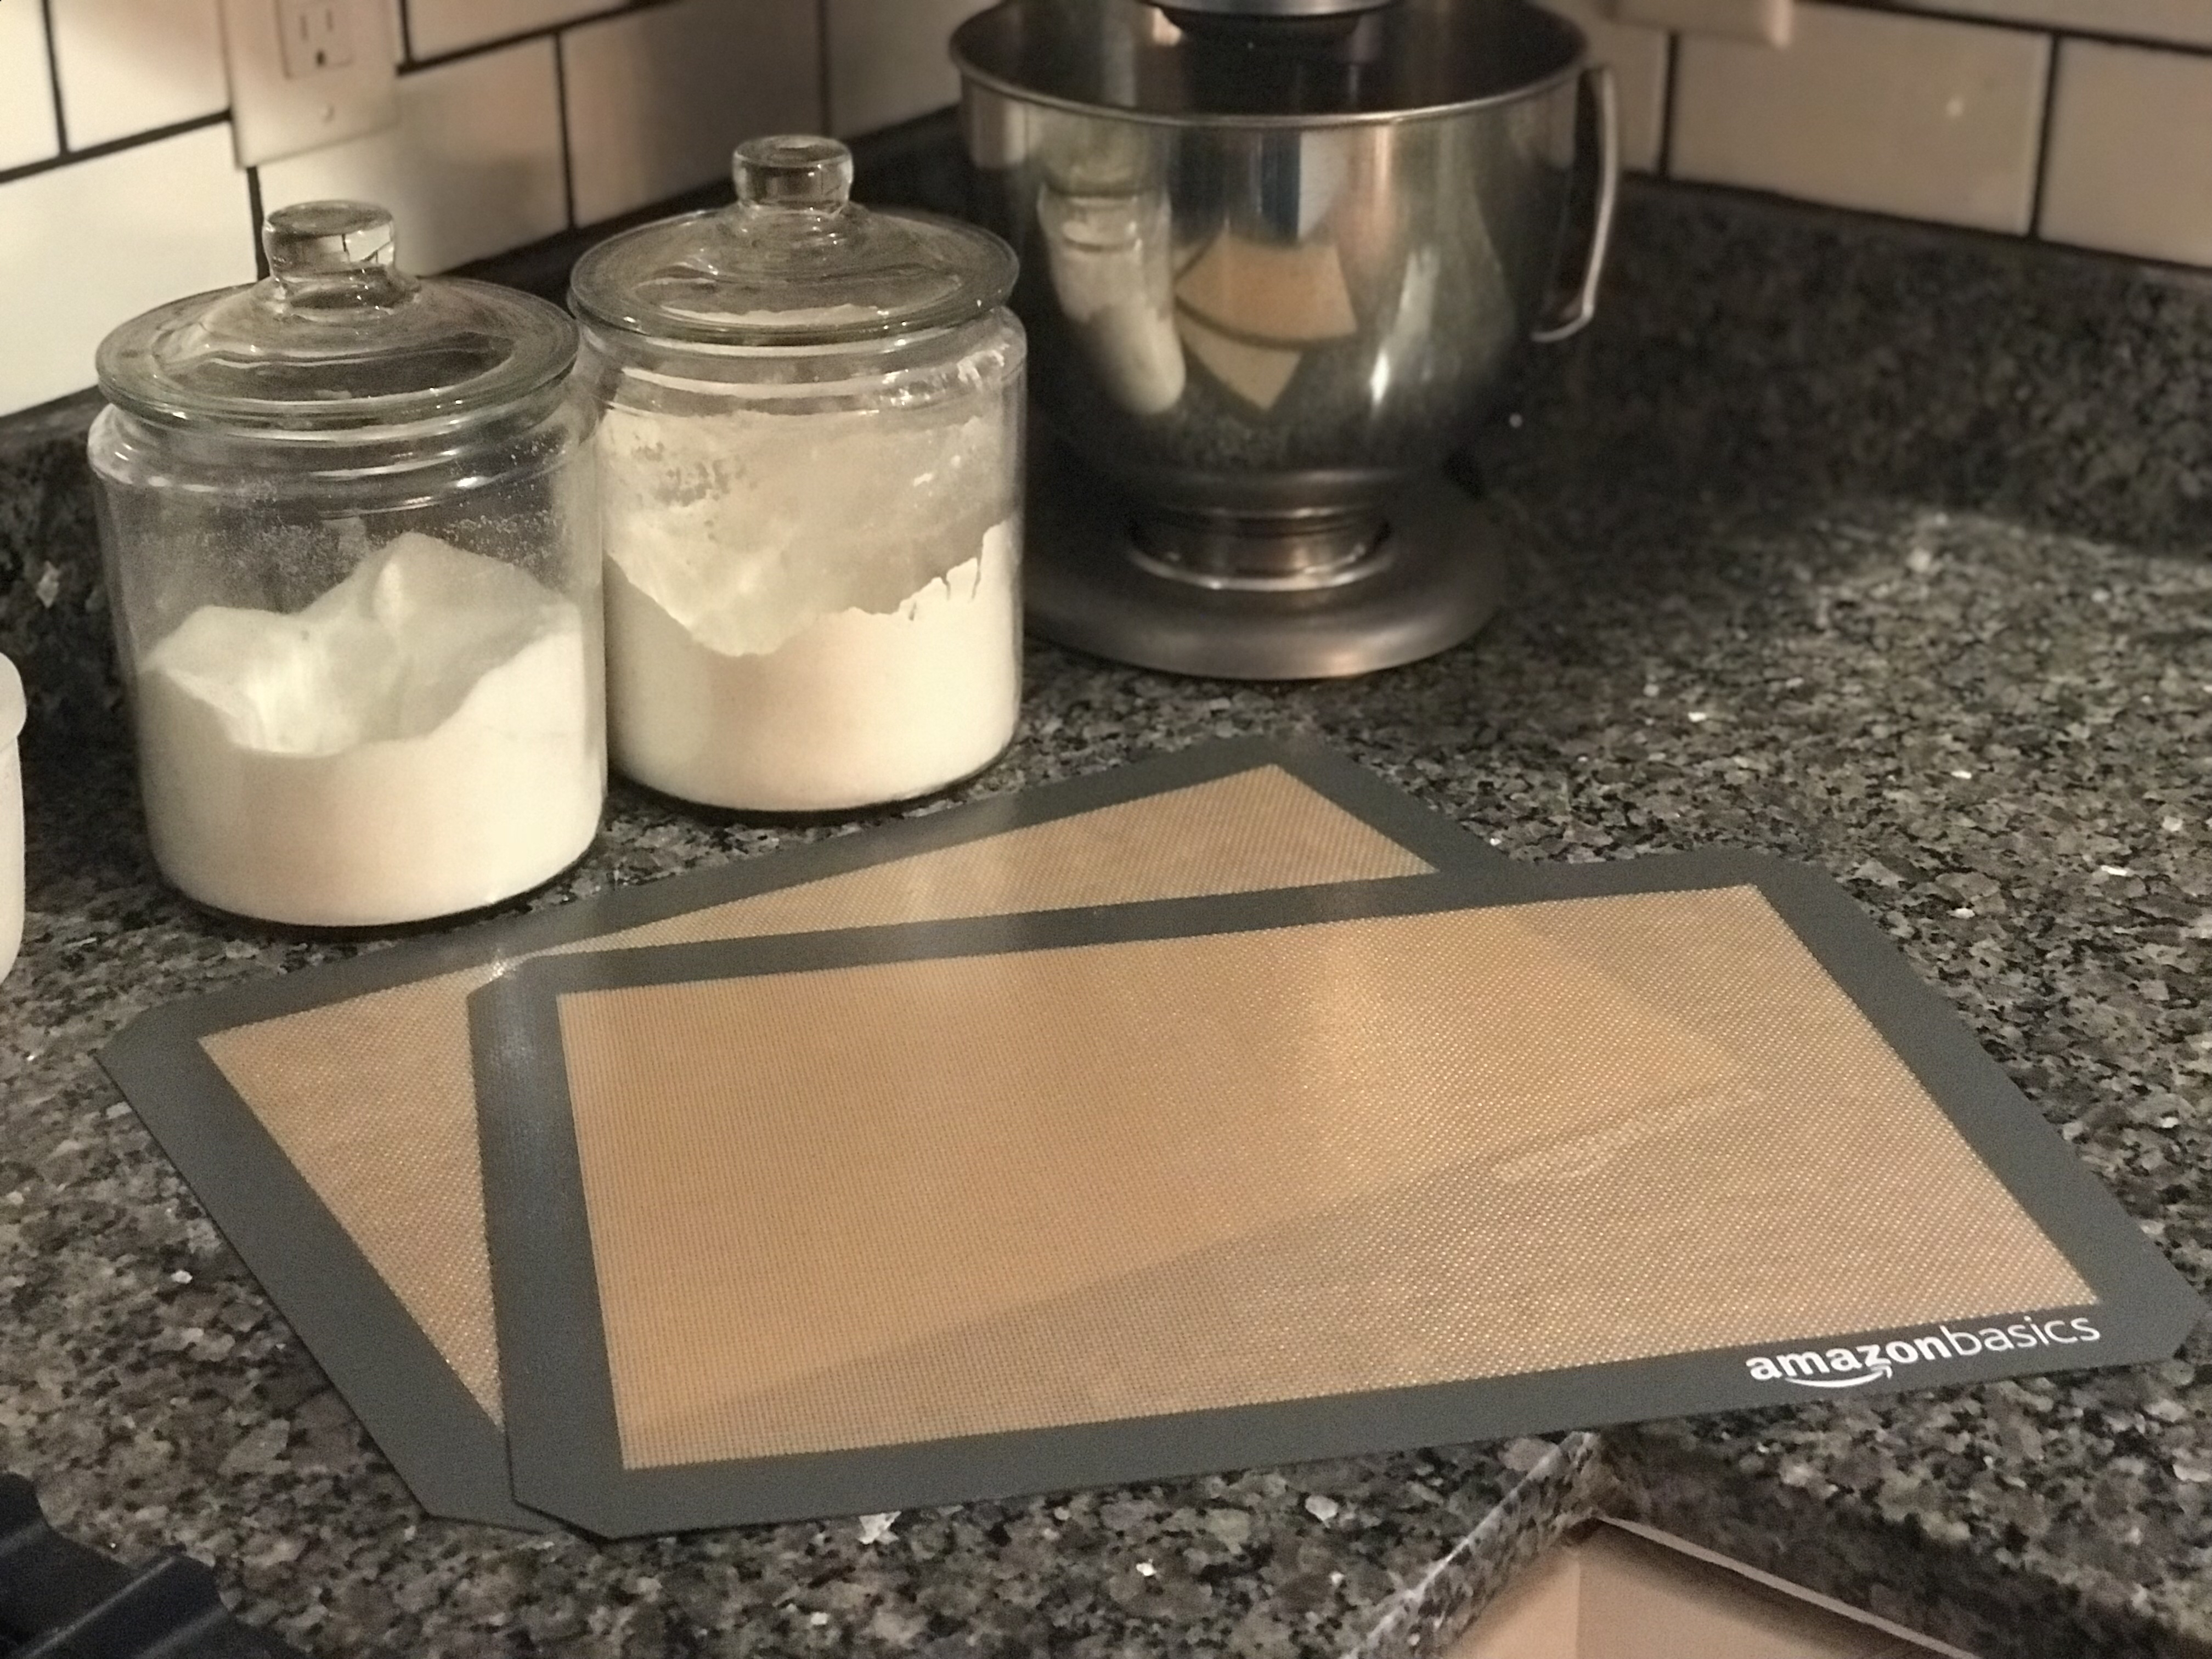 Our Amazon brand cost comparison includes these silicon baking mats.